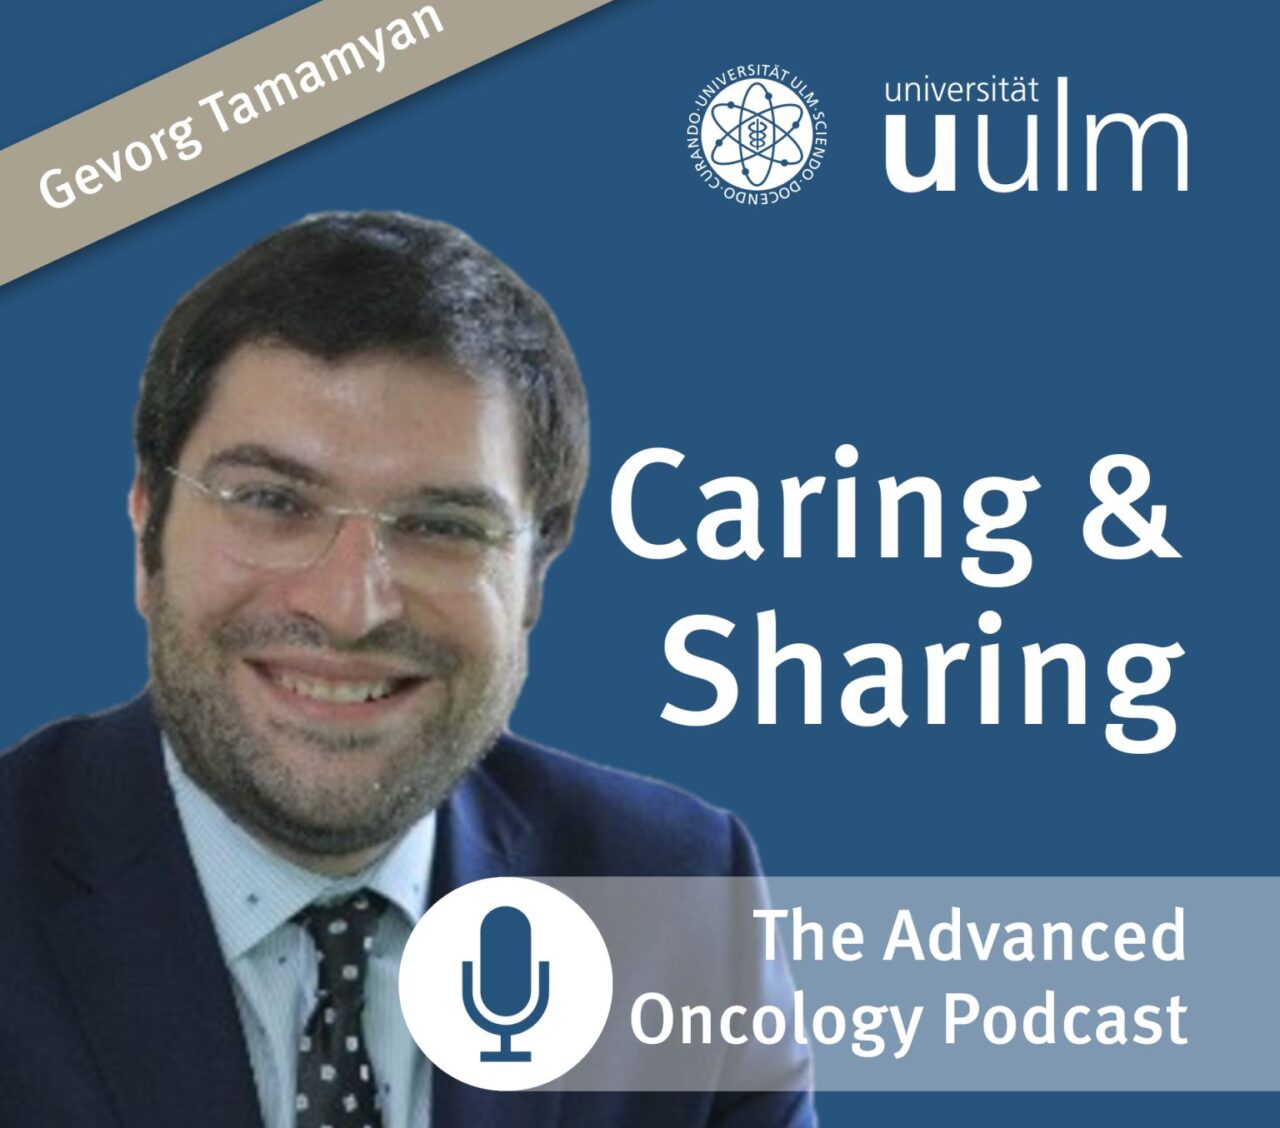 Our first podcast episode is airing on streaming platforms – Advanced Oncology